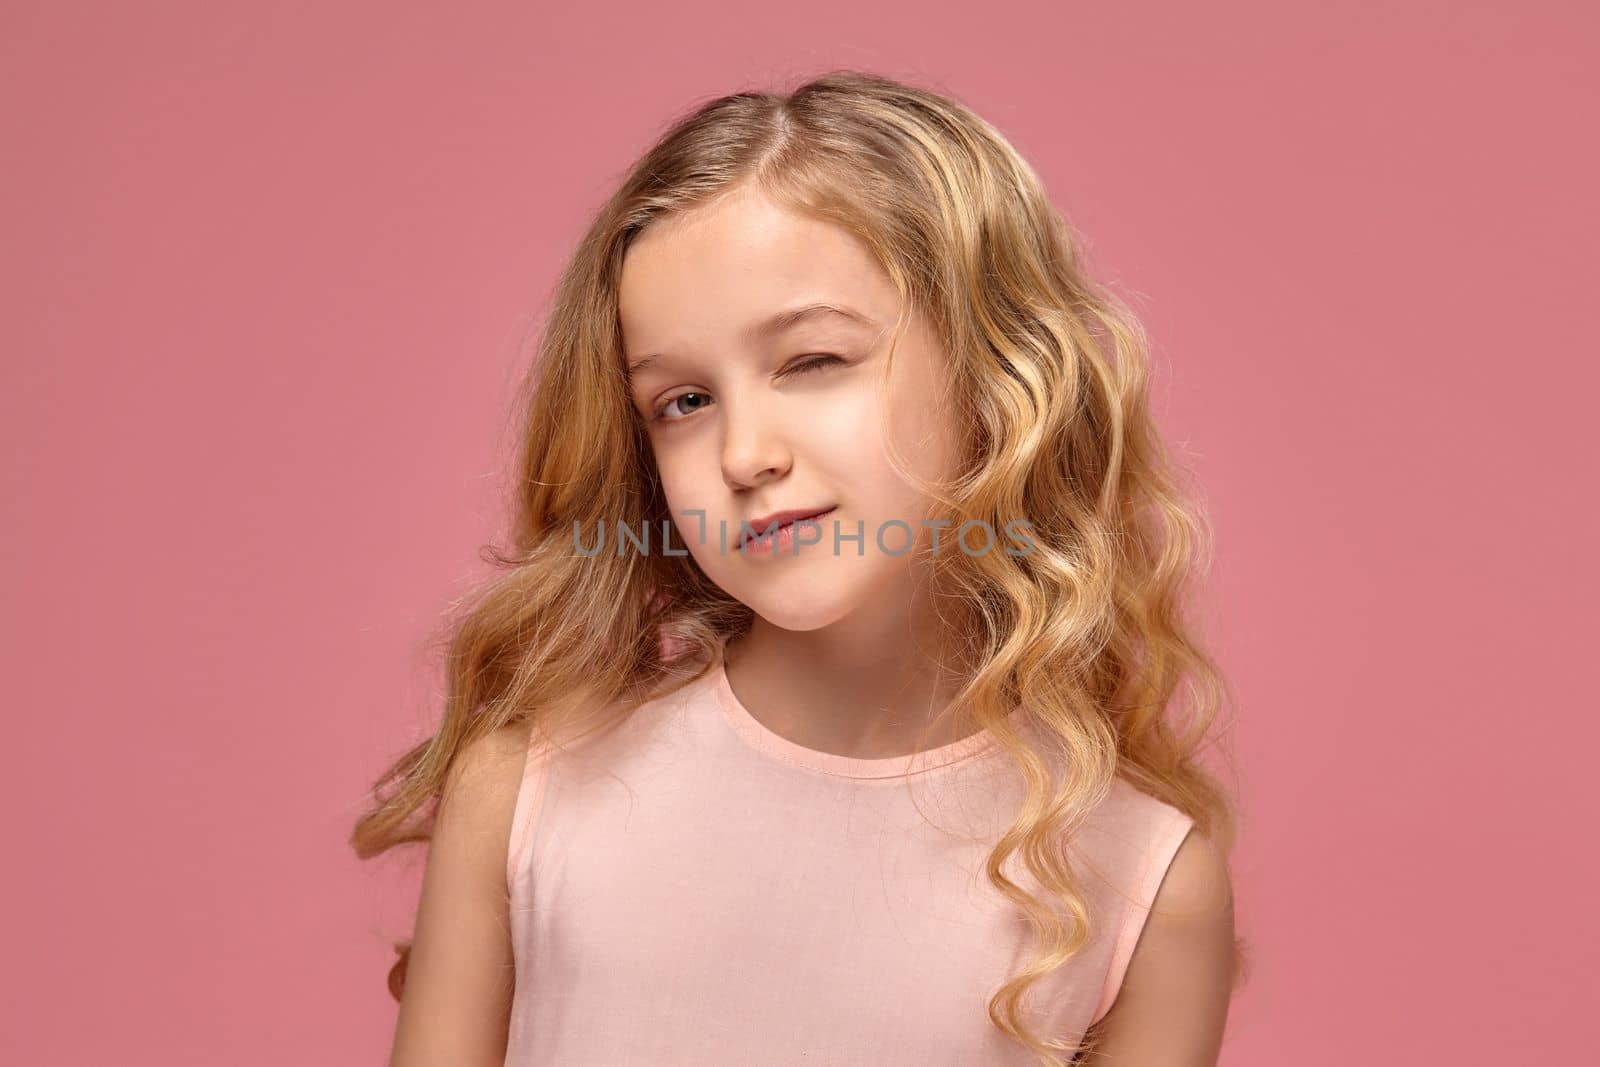 Beautiful little girl with a blond curly hair, in a pink dress winks into the camera, on a pink background